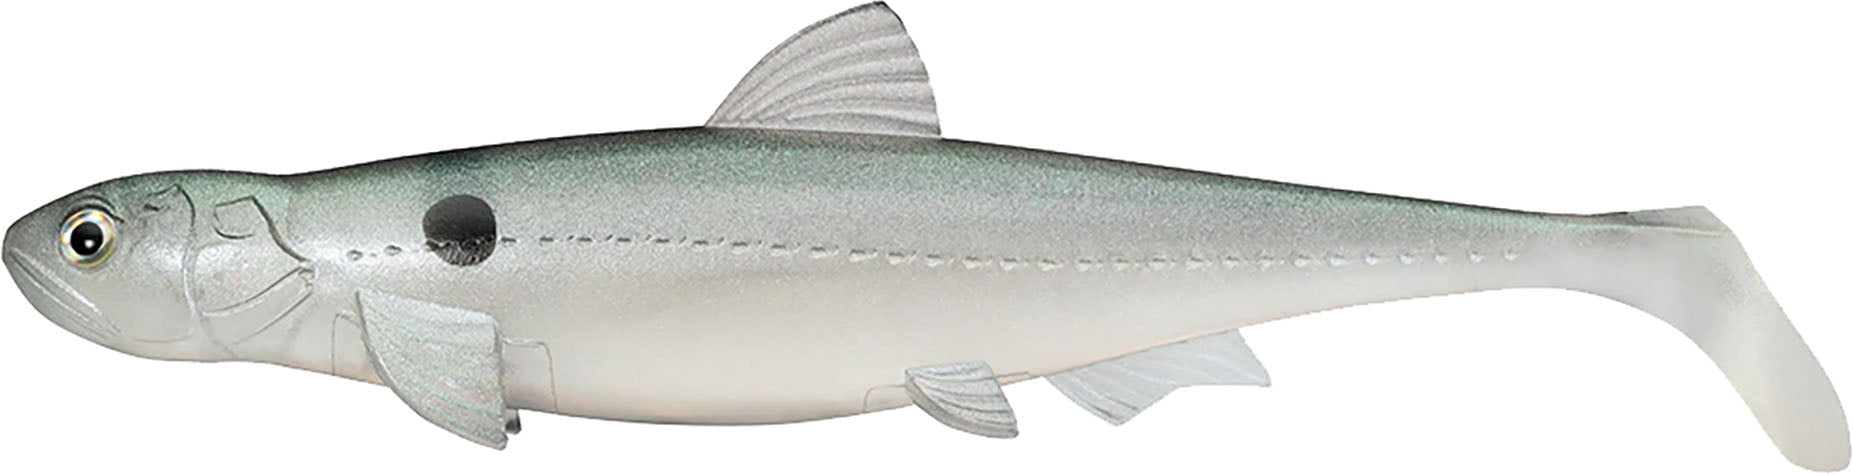 Evergreen Last Ace Paddle Tail Swimbait - 5.5 Inches